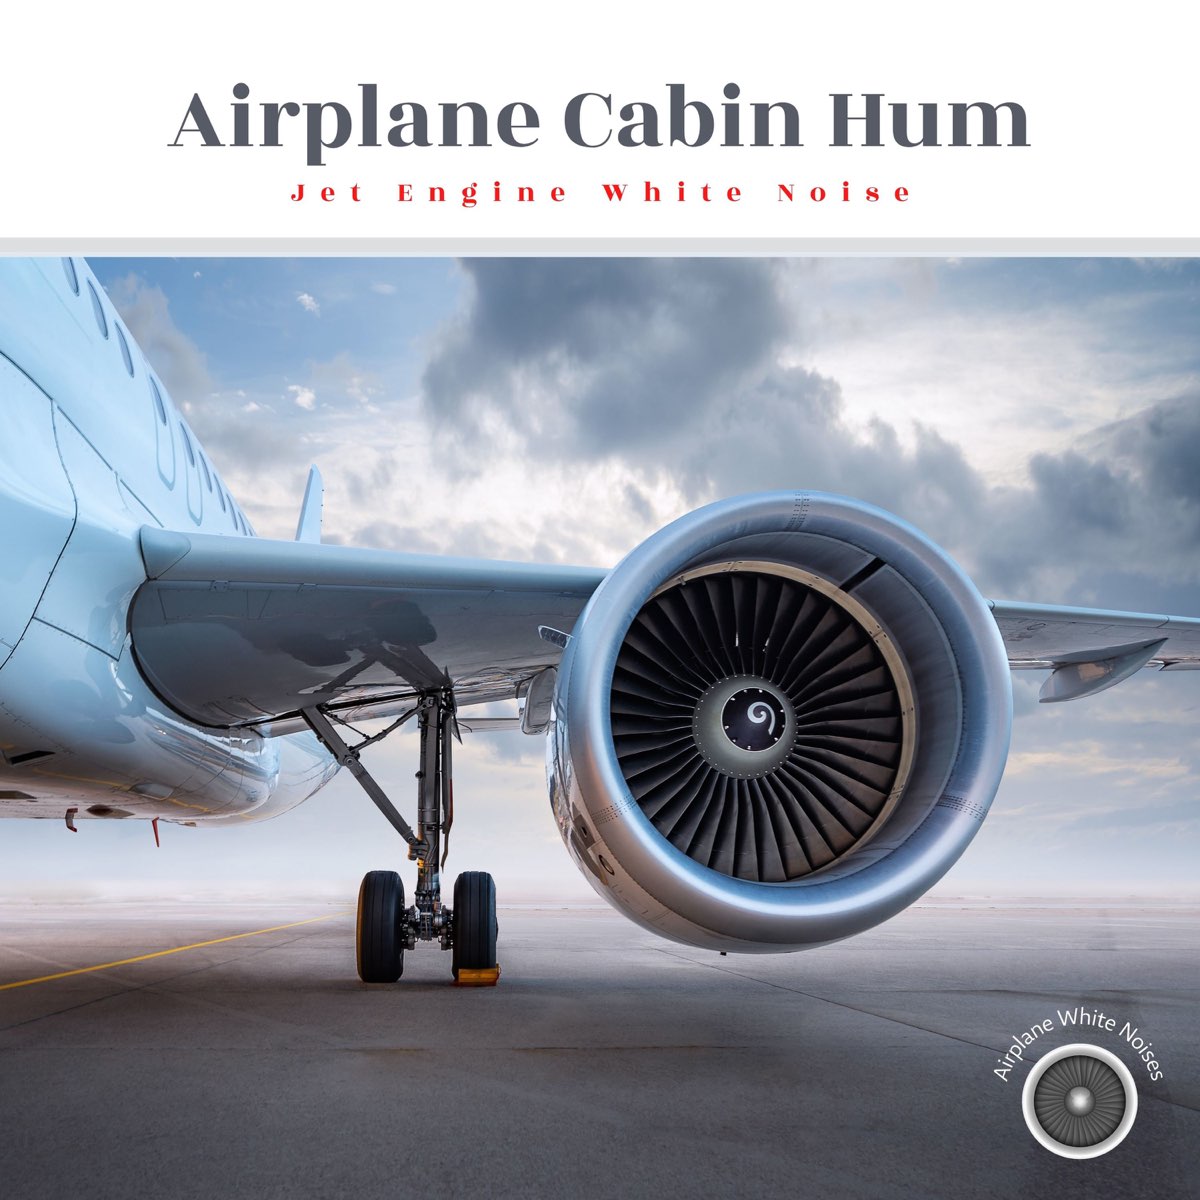 Airplane Cabin Hum (Jet Engine White Noise) by Airplane White Noise,  Airplane Sounds & Airplane White Noises on Apple Music